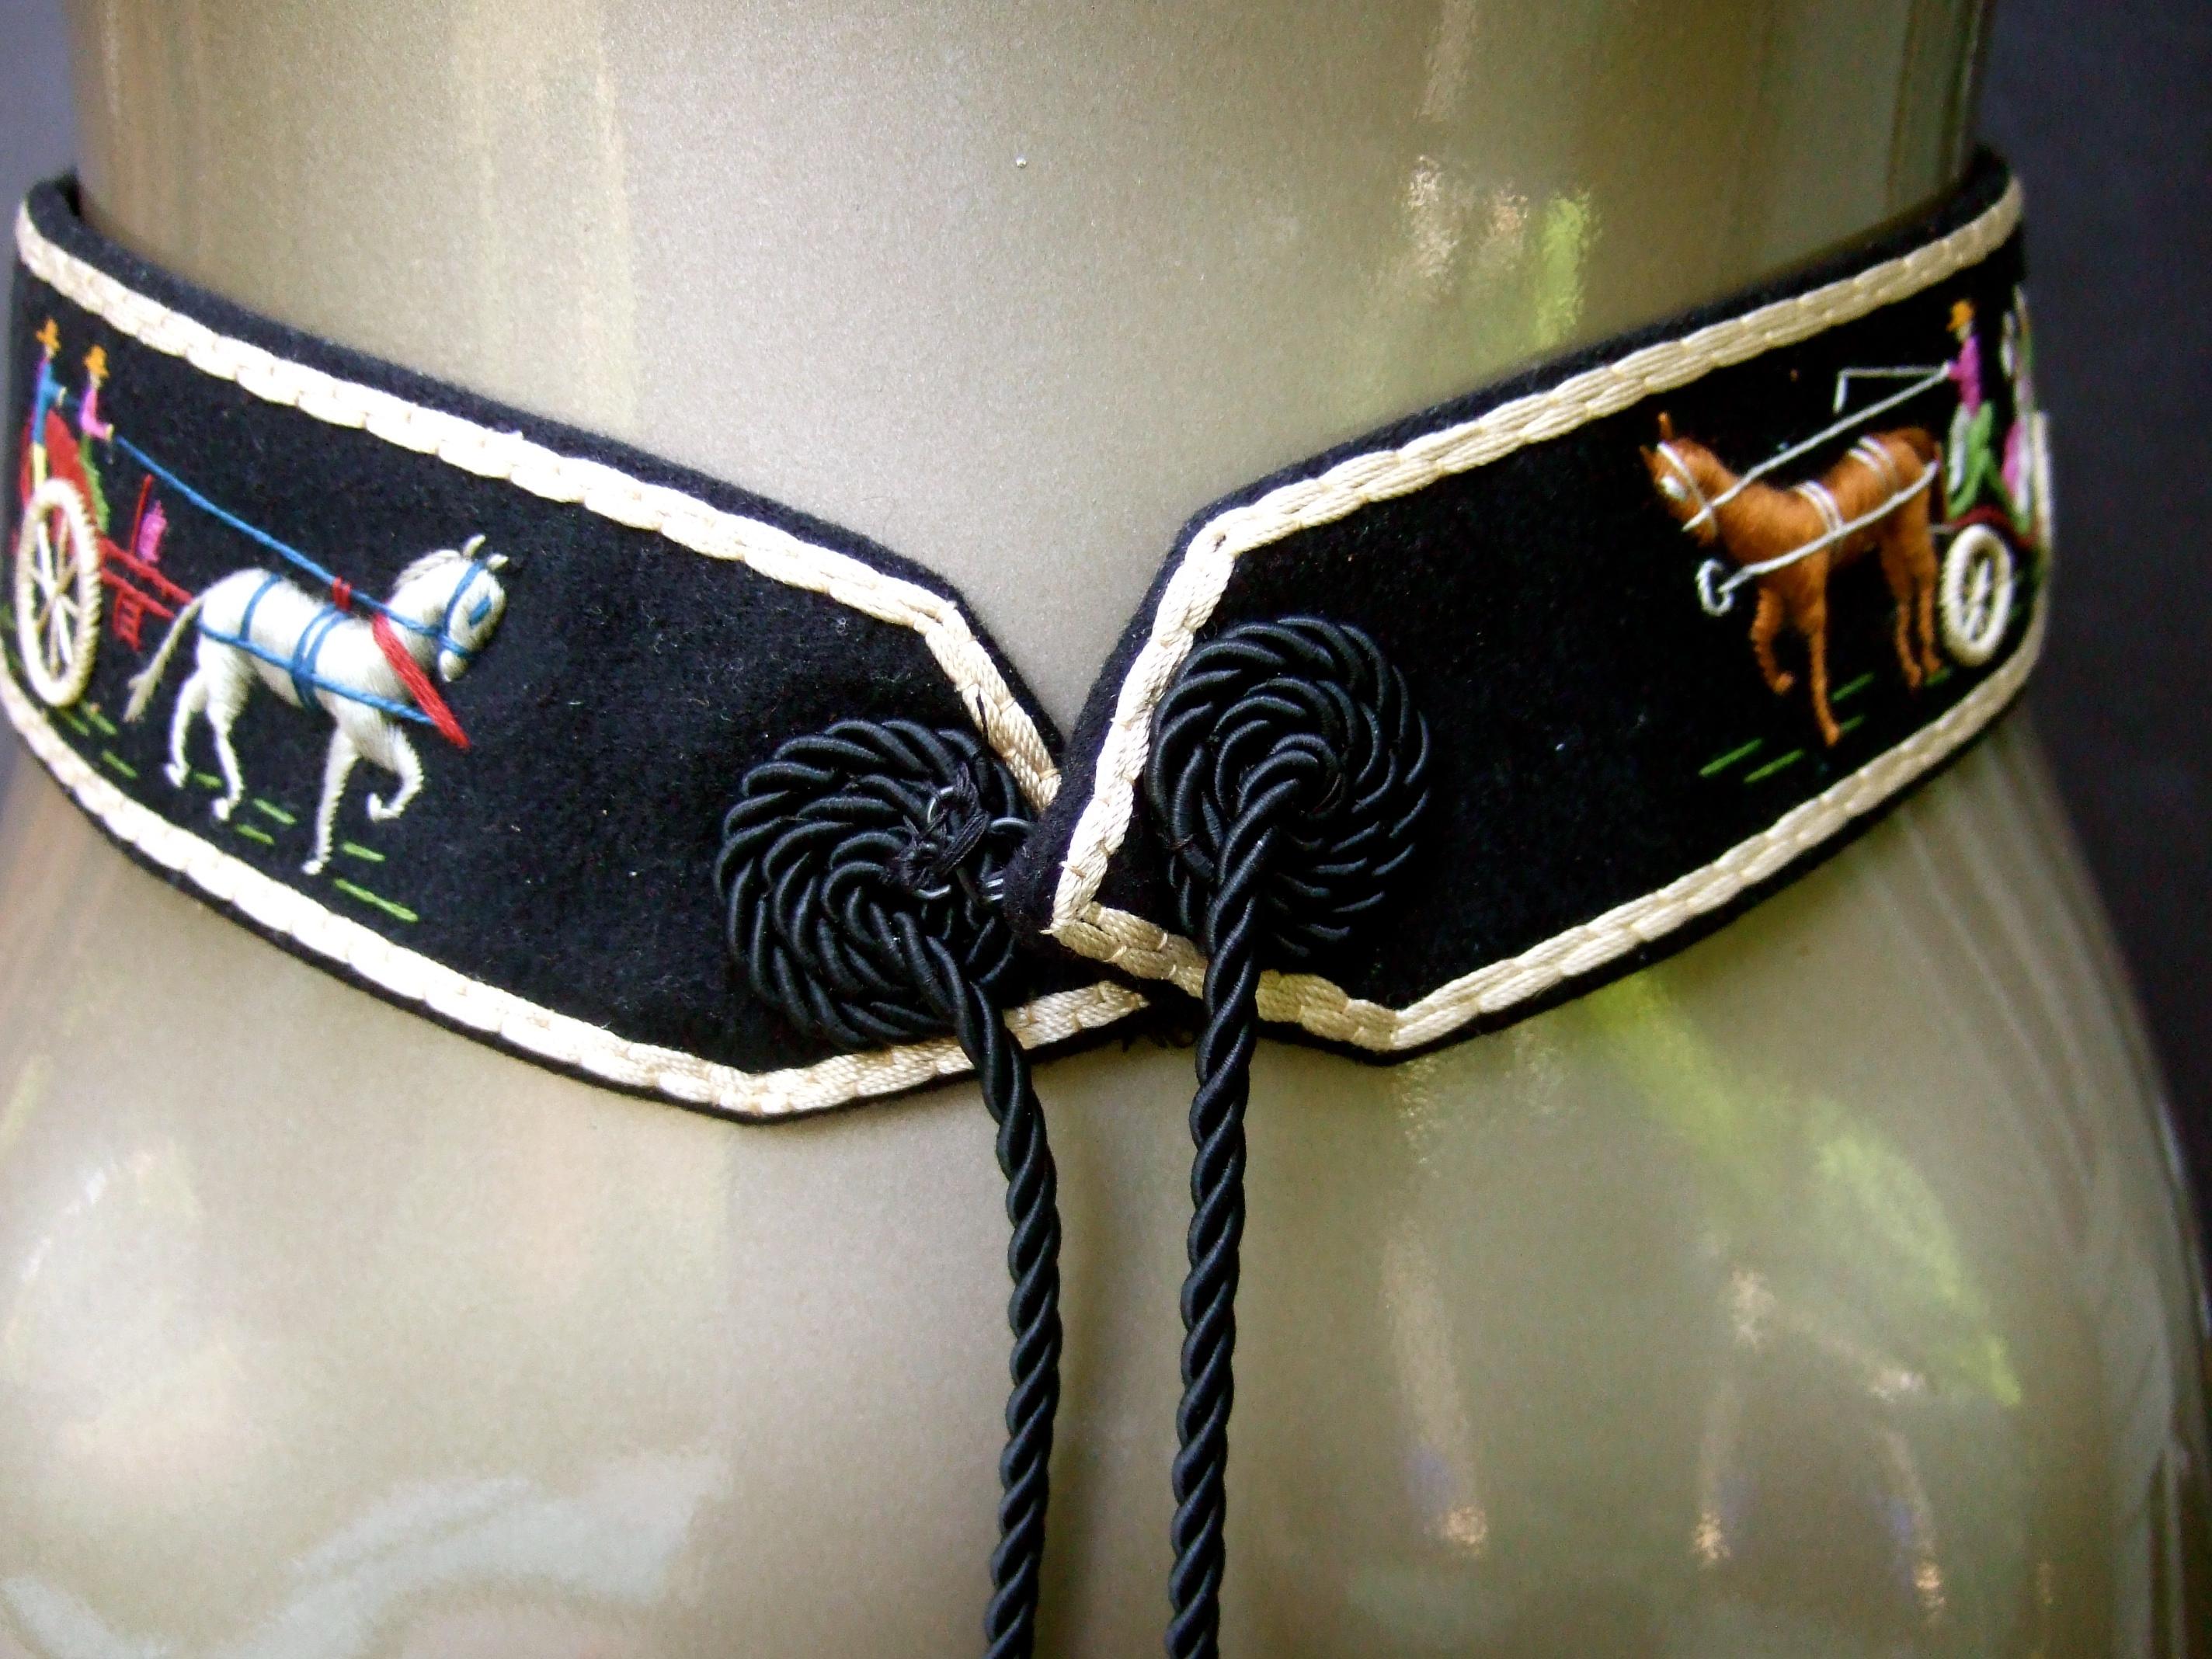 Hermes Paris Handmade Cloth Artisan Embroidered Tassel Belt c 1970s  In Good Condition For Sale In University City, MO